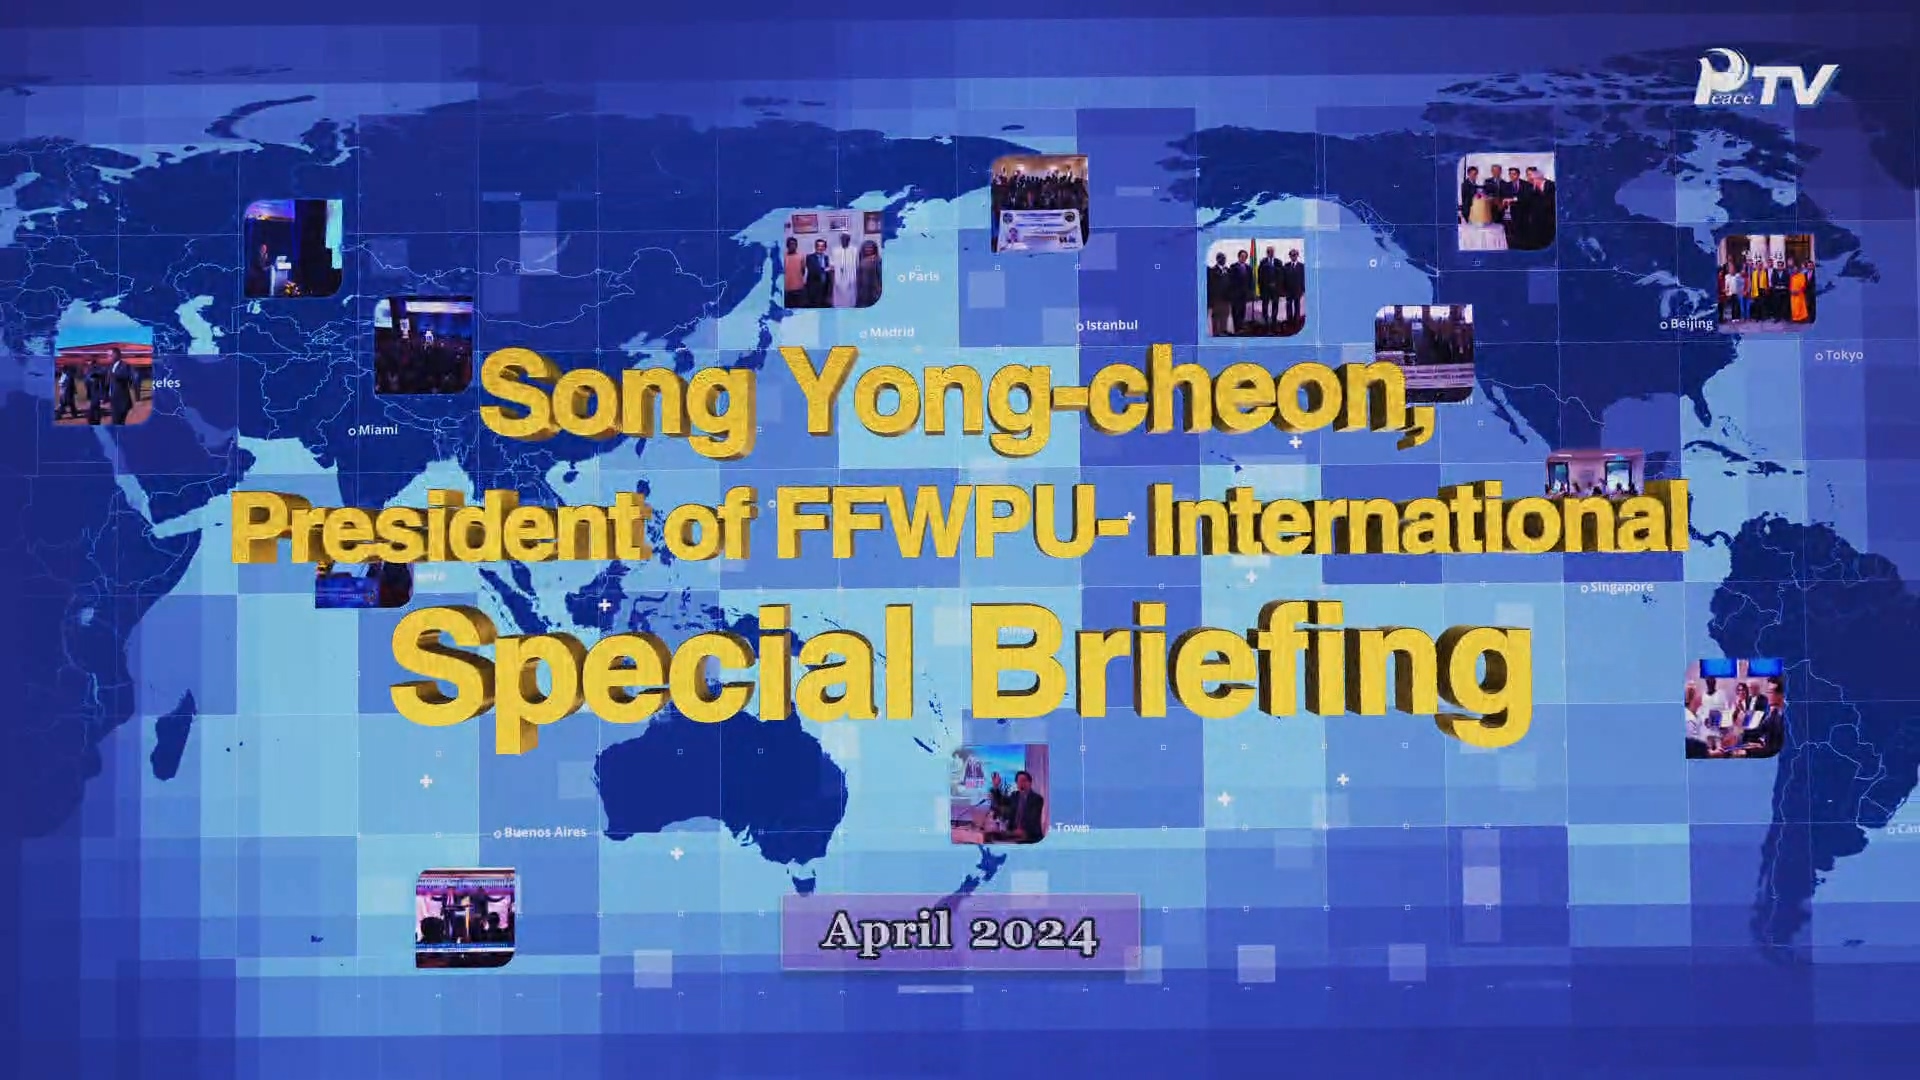 April 2024 – Special Briefing : Song Yong-cheon, International President of FFWPU